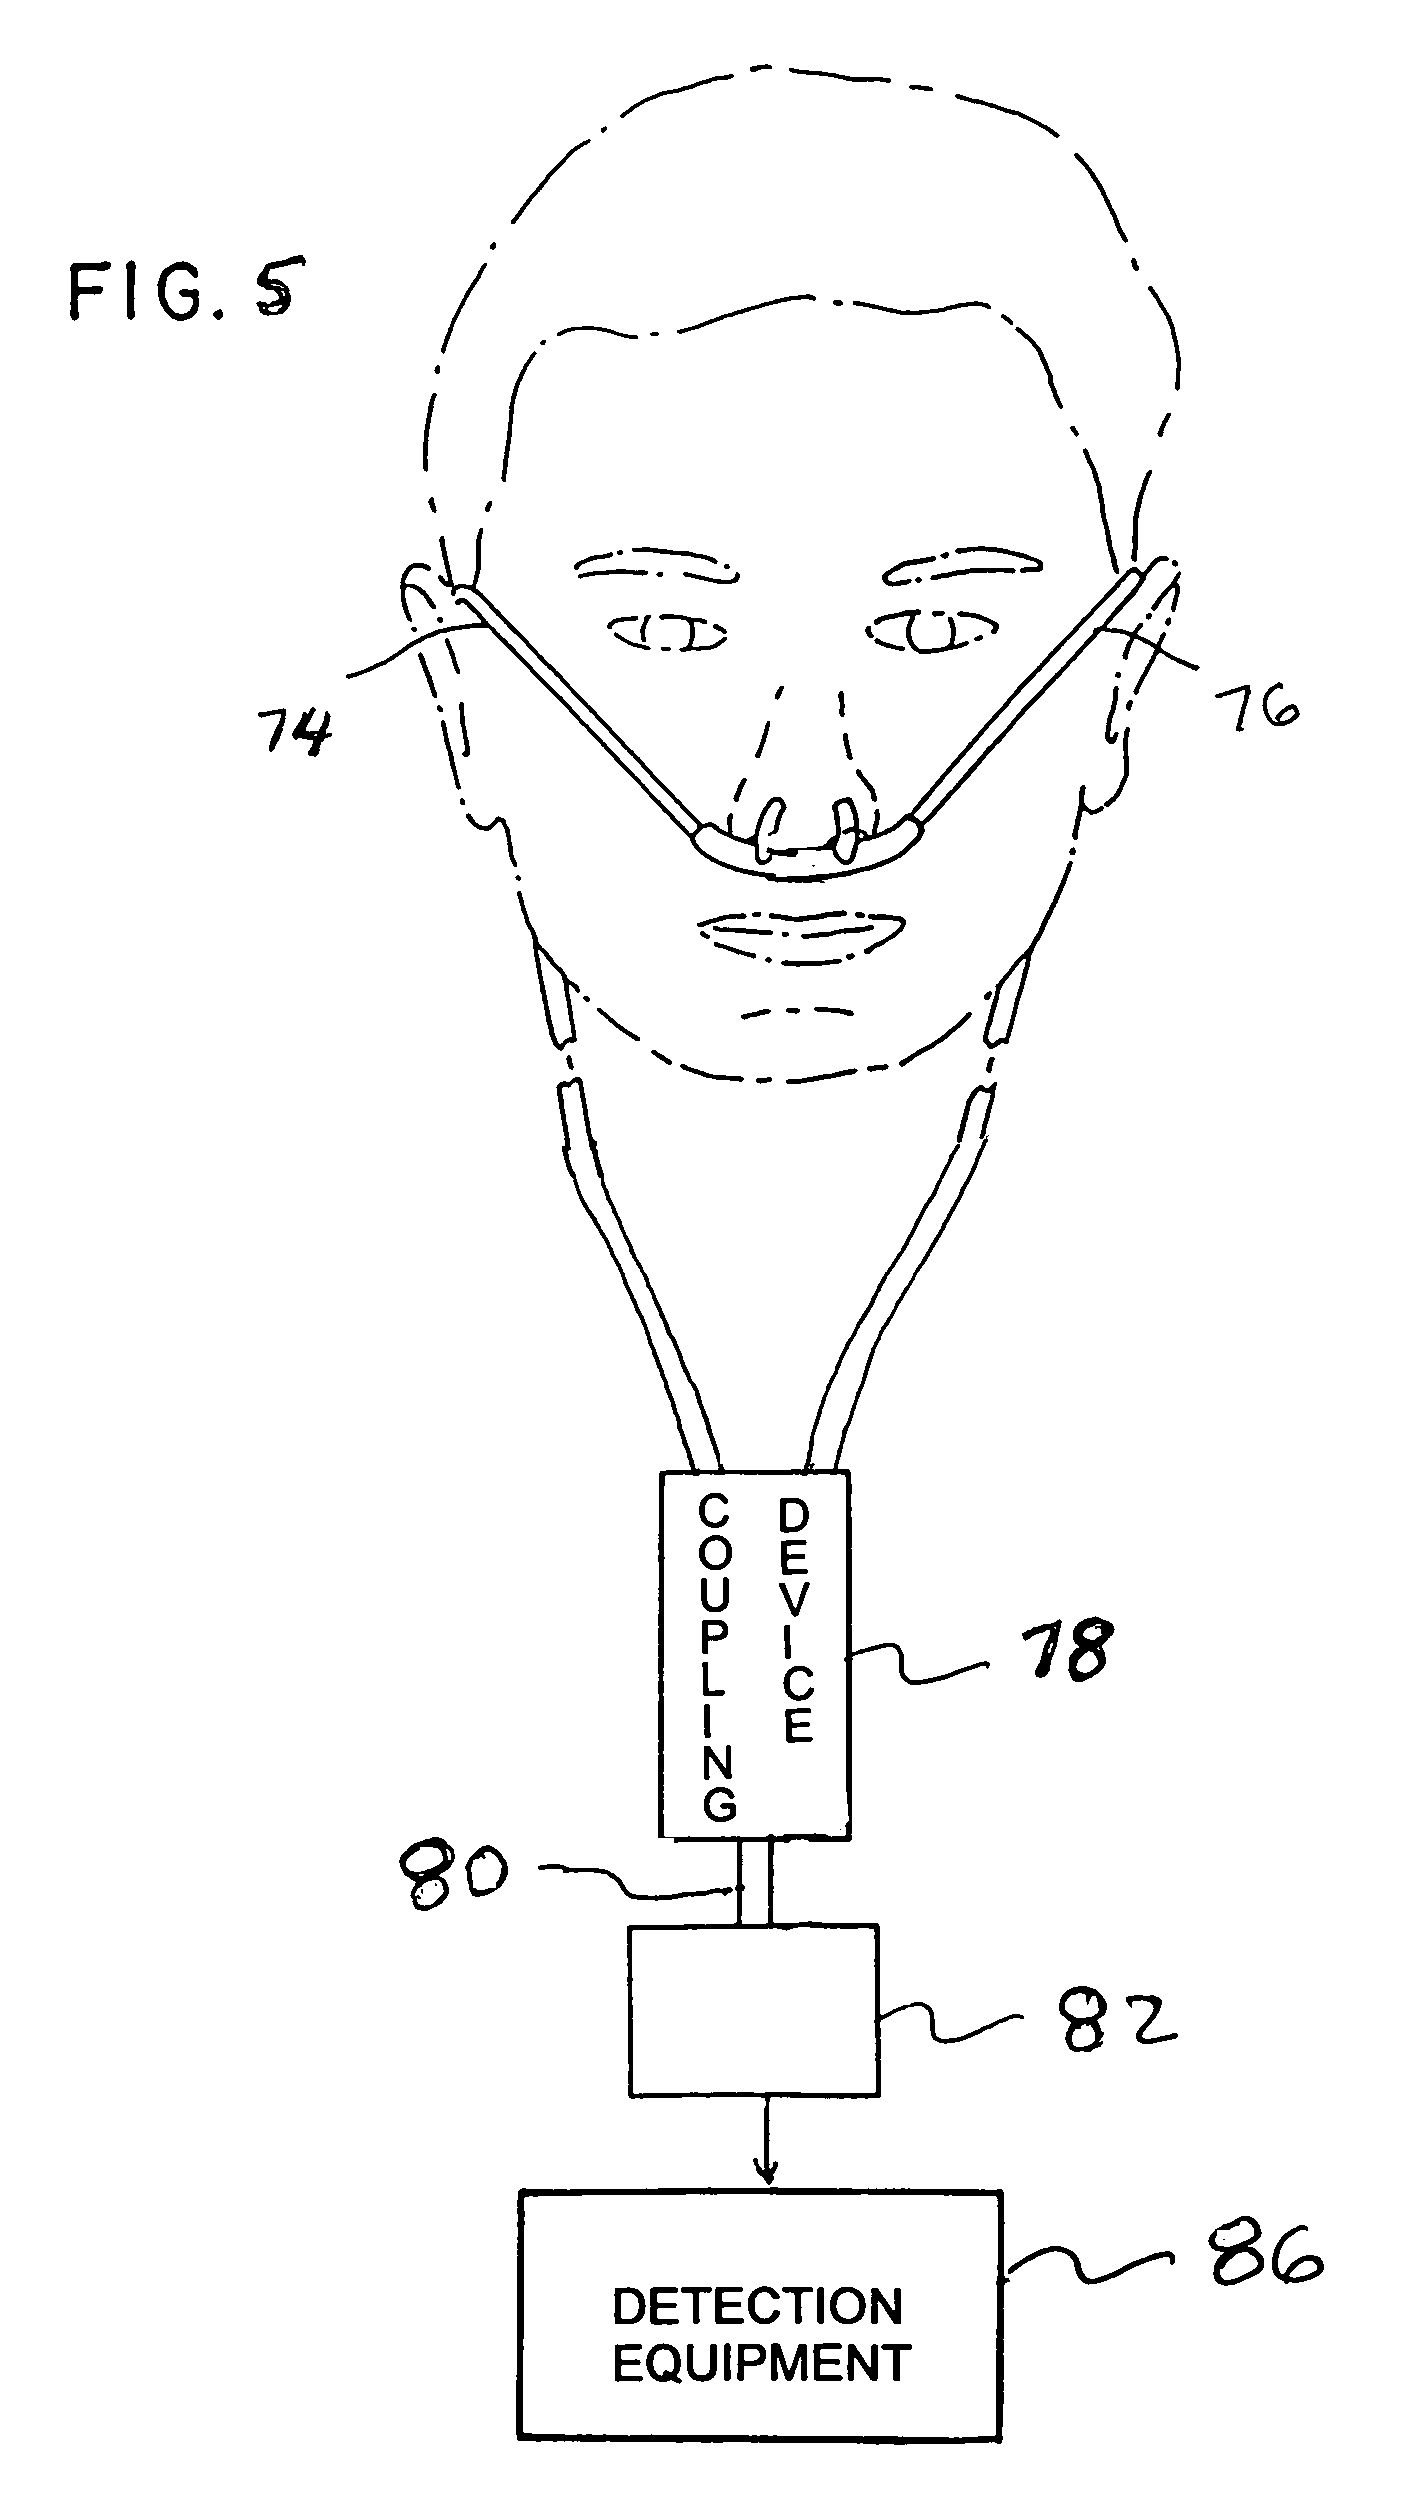 Nasal cannula for acquiring breathing information